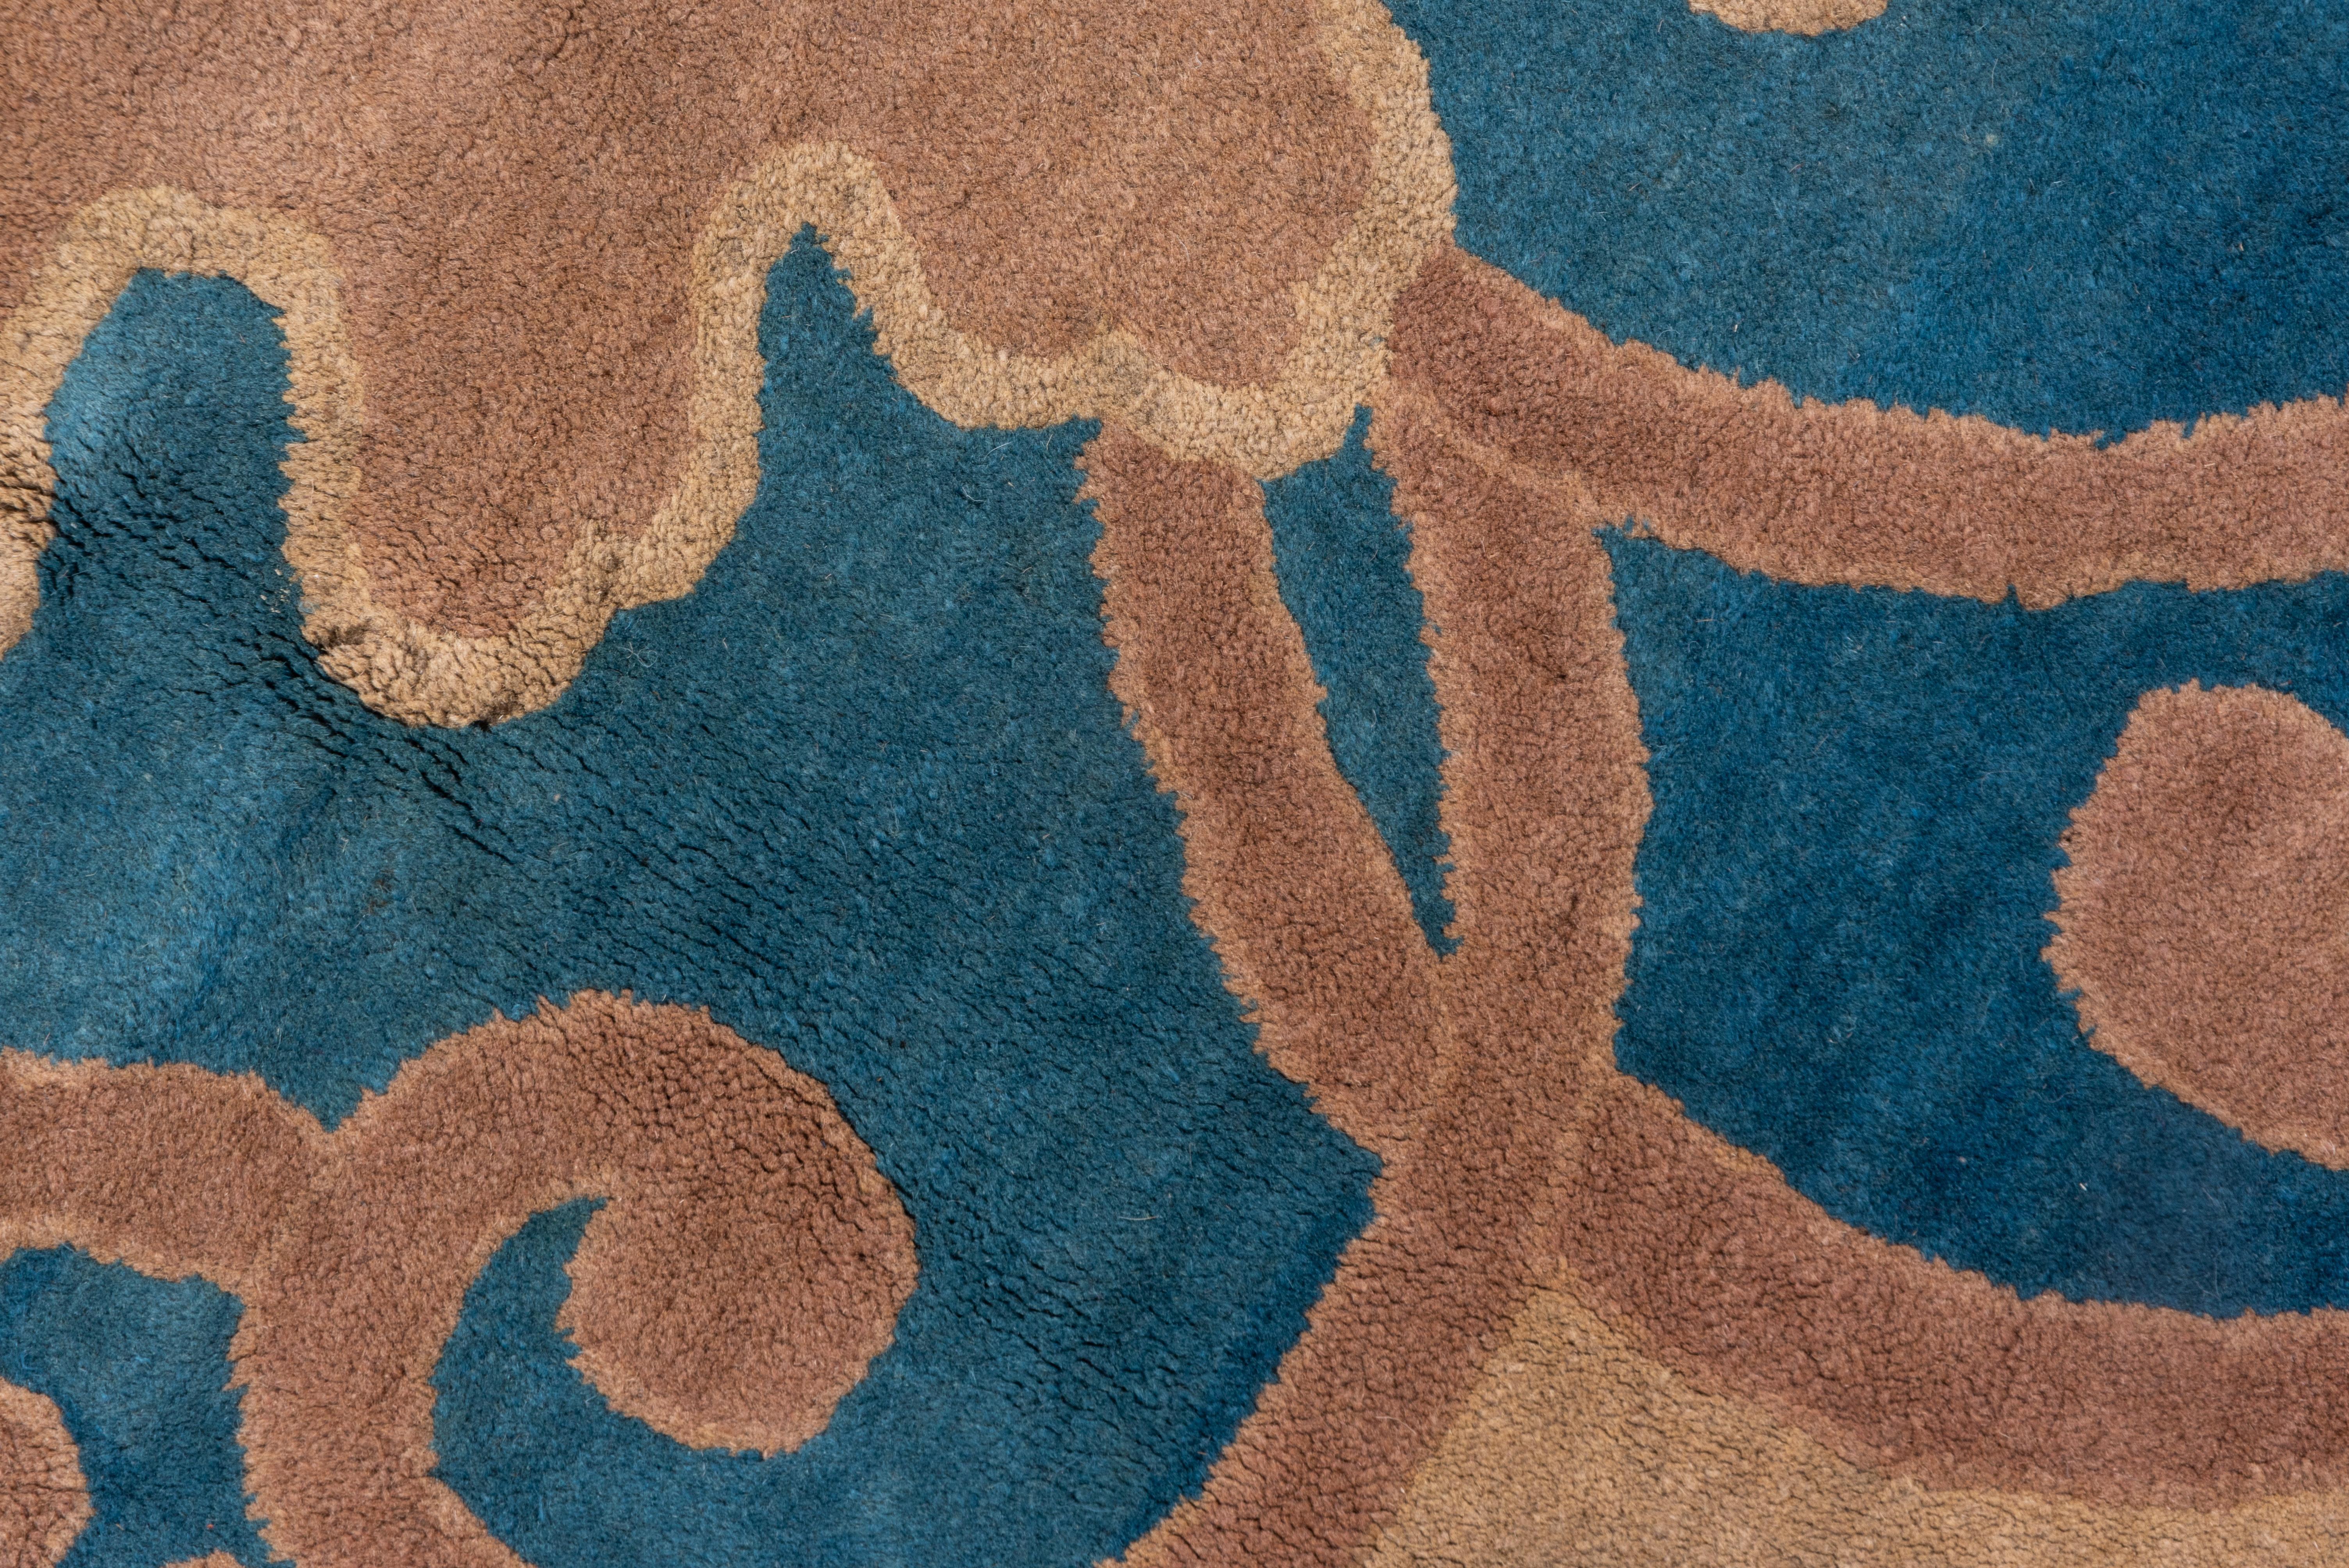 This European-style Peking carpet shows a central tan, lappet-edge medallion with internal strapwork arabesques, on the light blue ground. Five petal rosettes appear in the sandy beige main border which has a volute inner edge. The plain blue outer